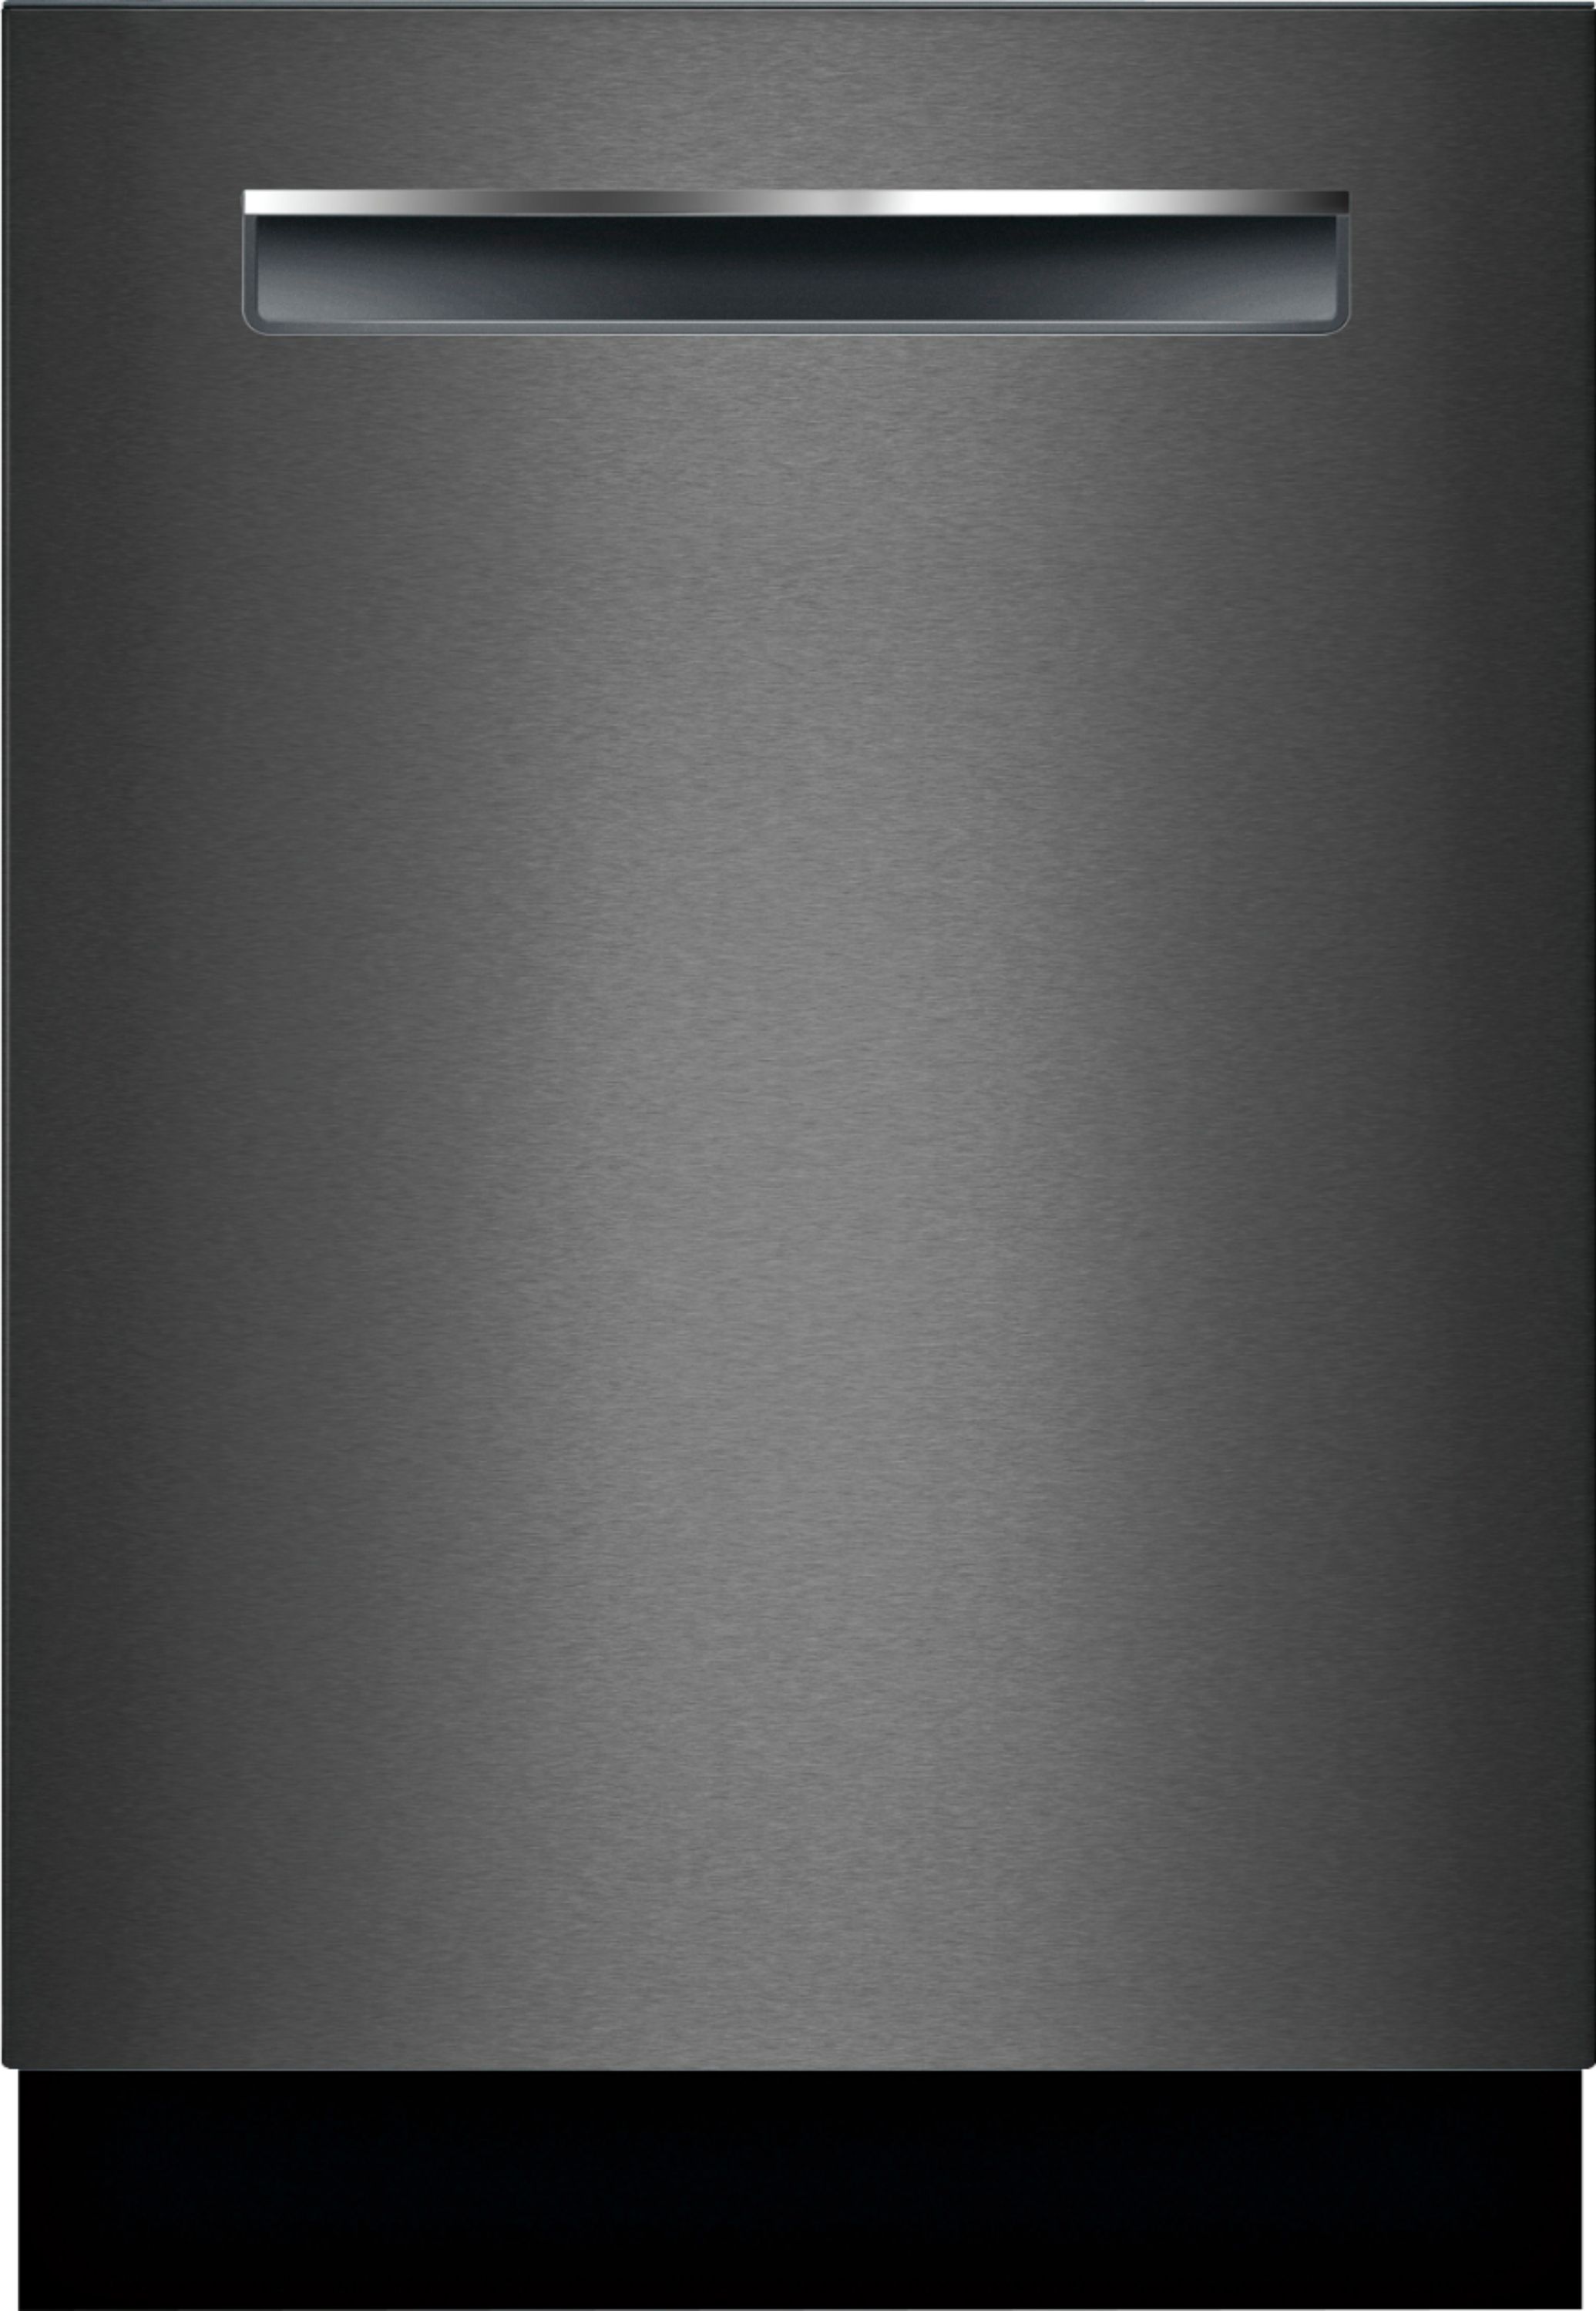 Bosch 800 Series 24 Top Control Built In Dishwasher With Crystaldry Stainless Steel Tub 3rd Rack 42 Dba Black Stainless Steel Shpm78z54n Best Buy